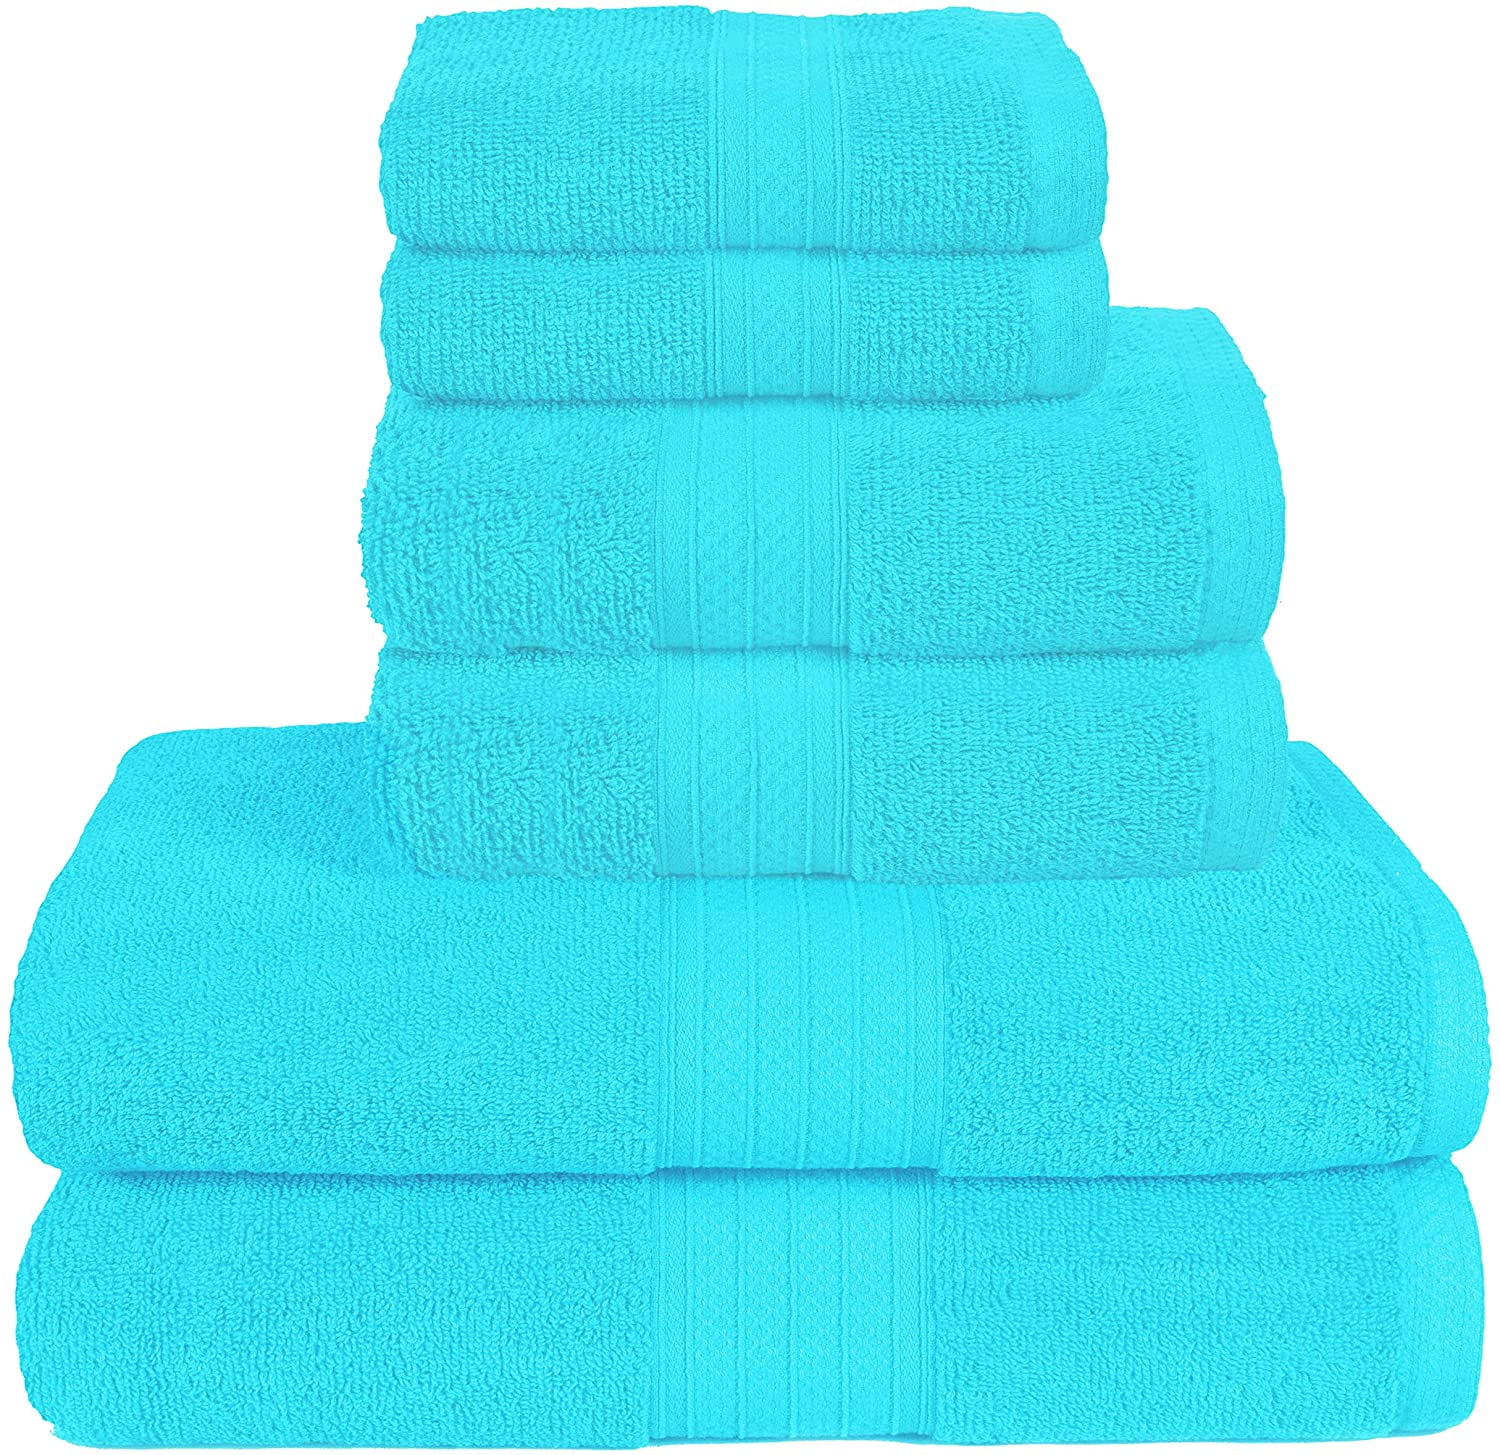 Details about   Top Selling Item Highly Absorbent 6 Pack Bath Towels Set 100% Cotton 600 GSM 